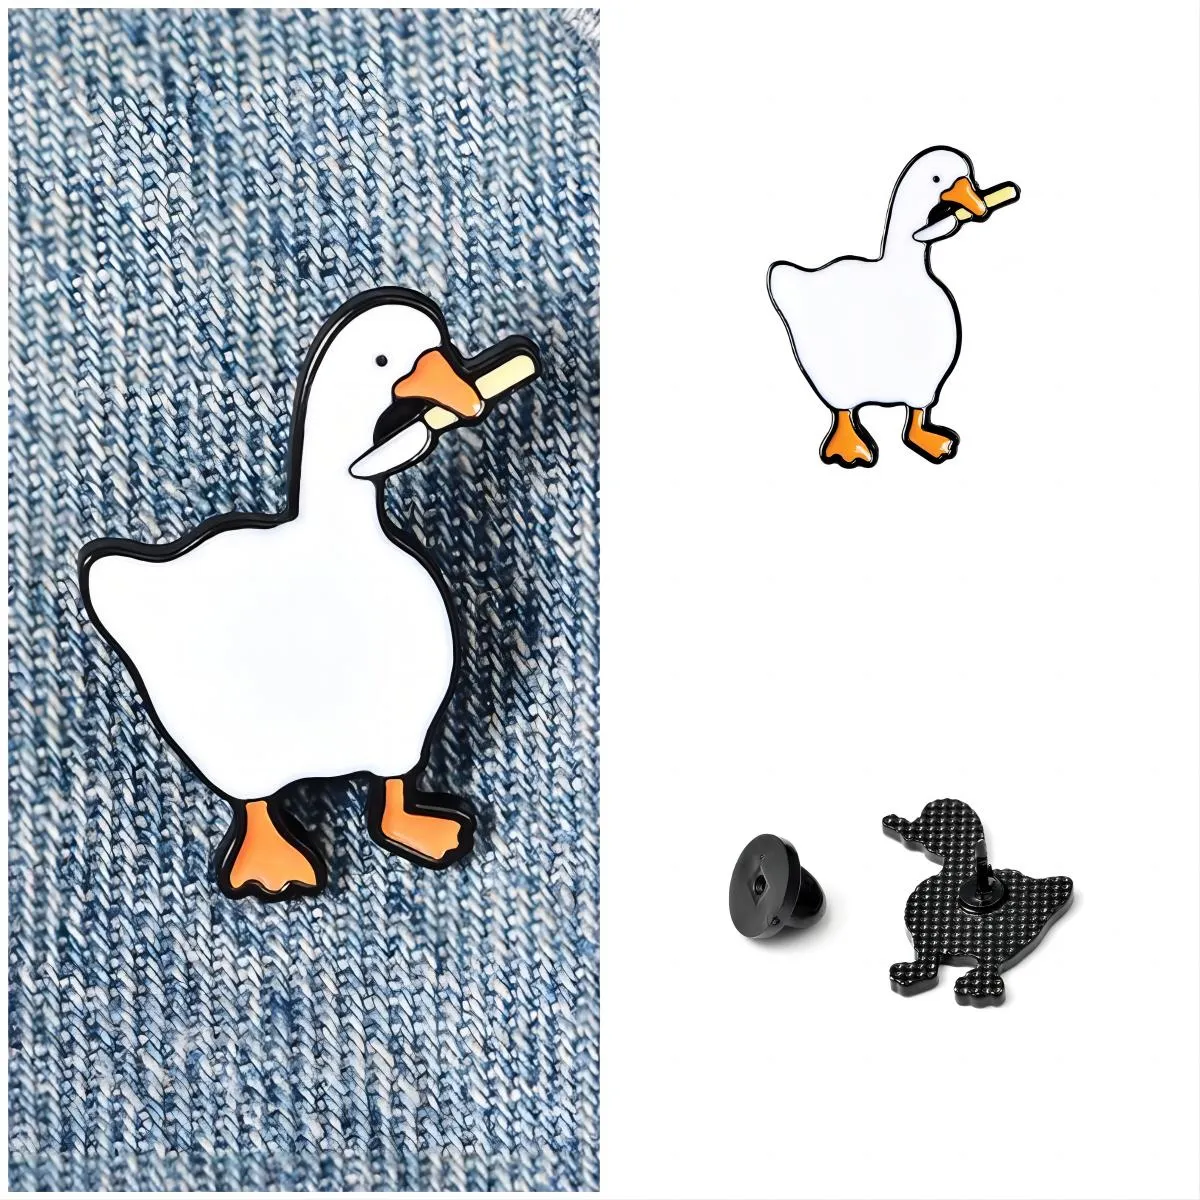 Untitled Goose Game Enamel Brooches Pins Animal Kids Cute Kawaii Metal Badge For Women Fashion Jewelry